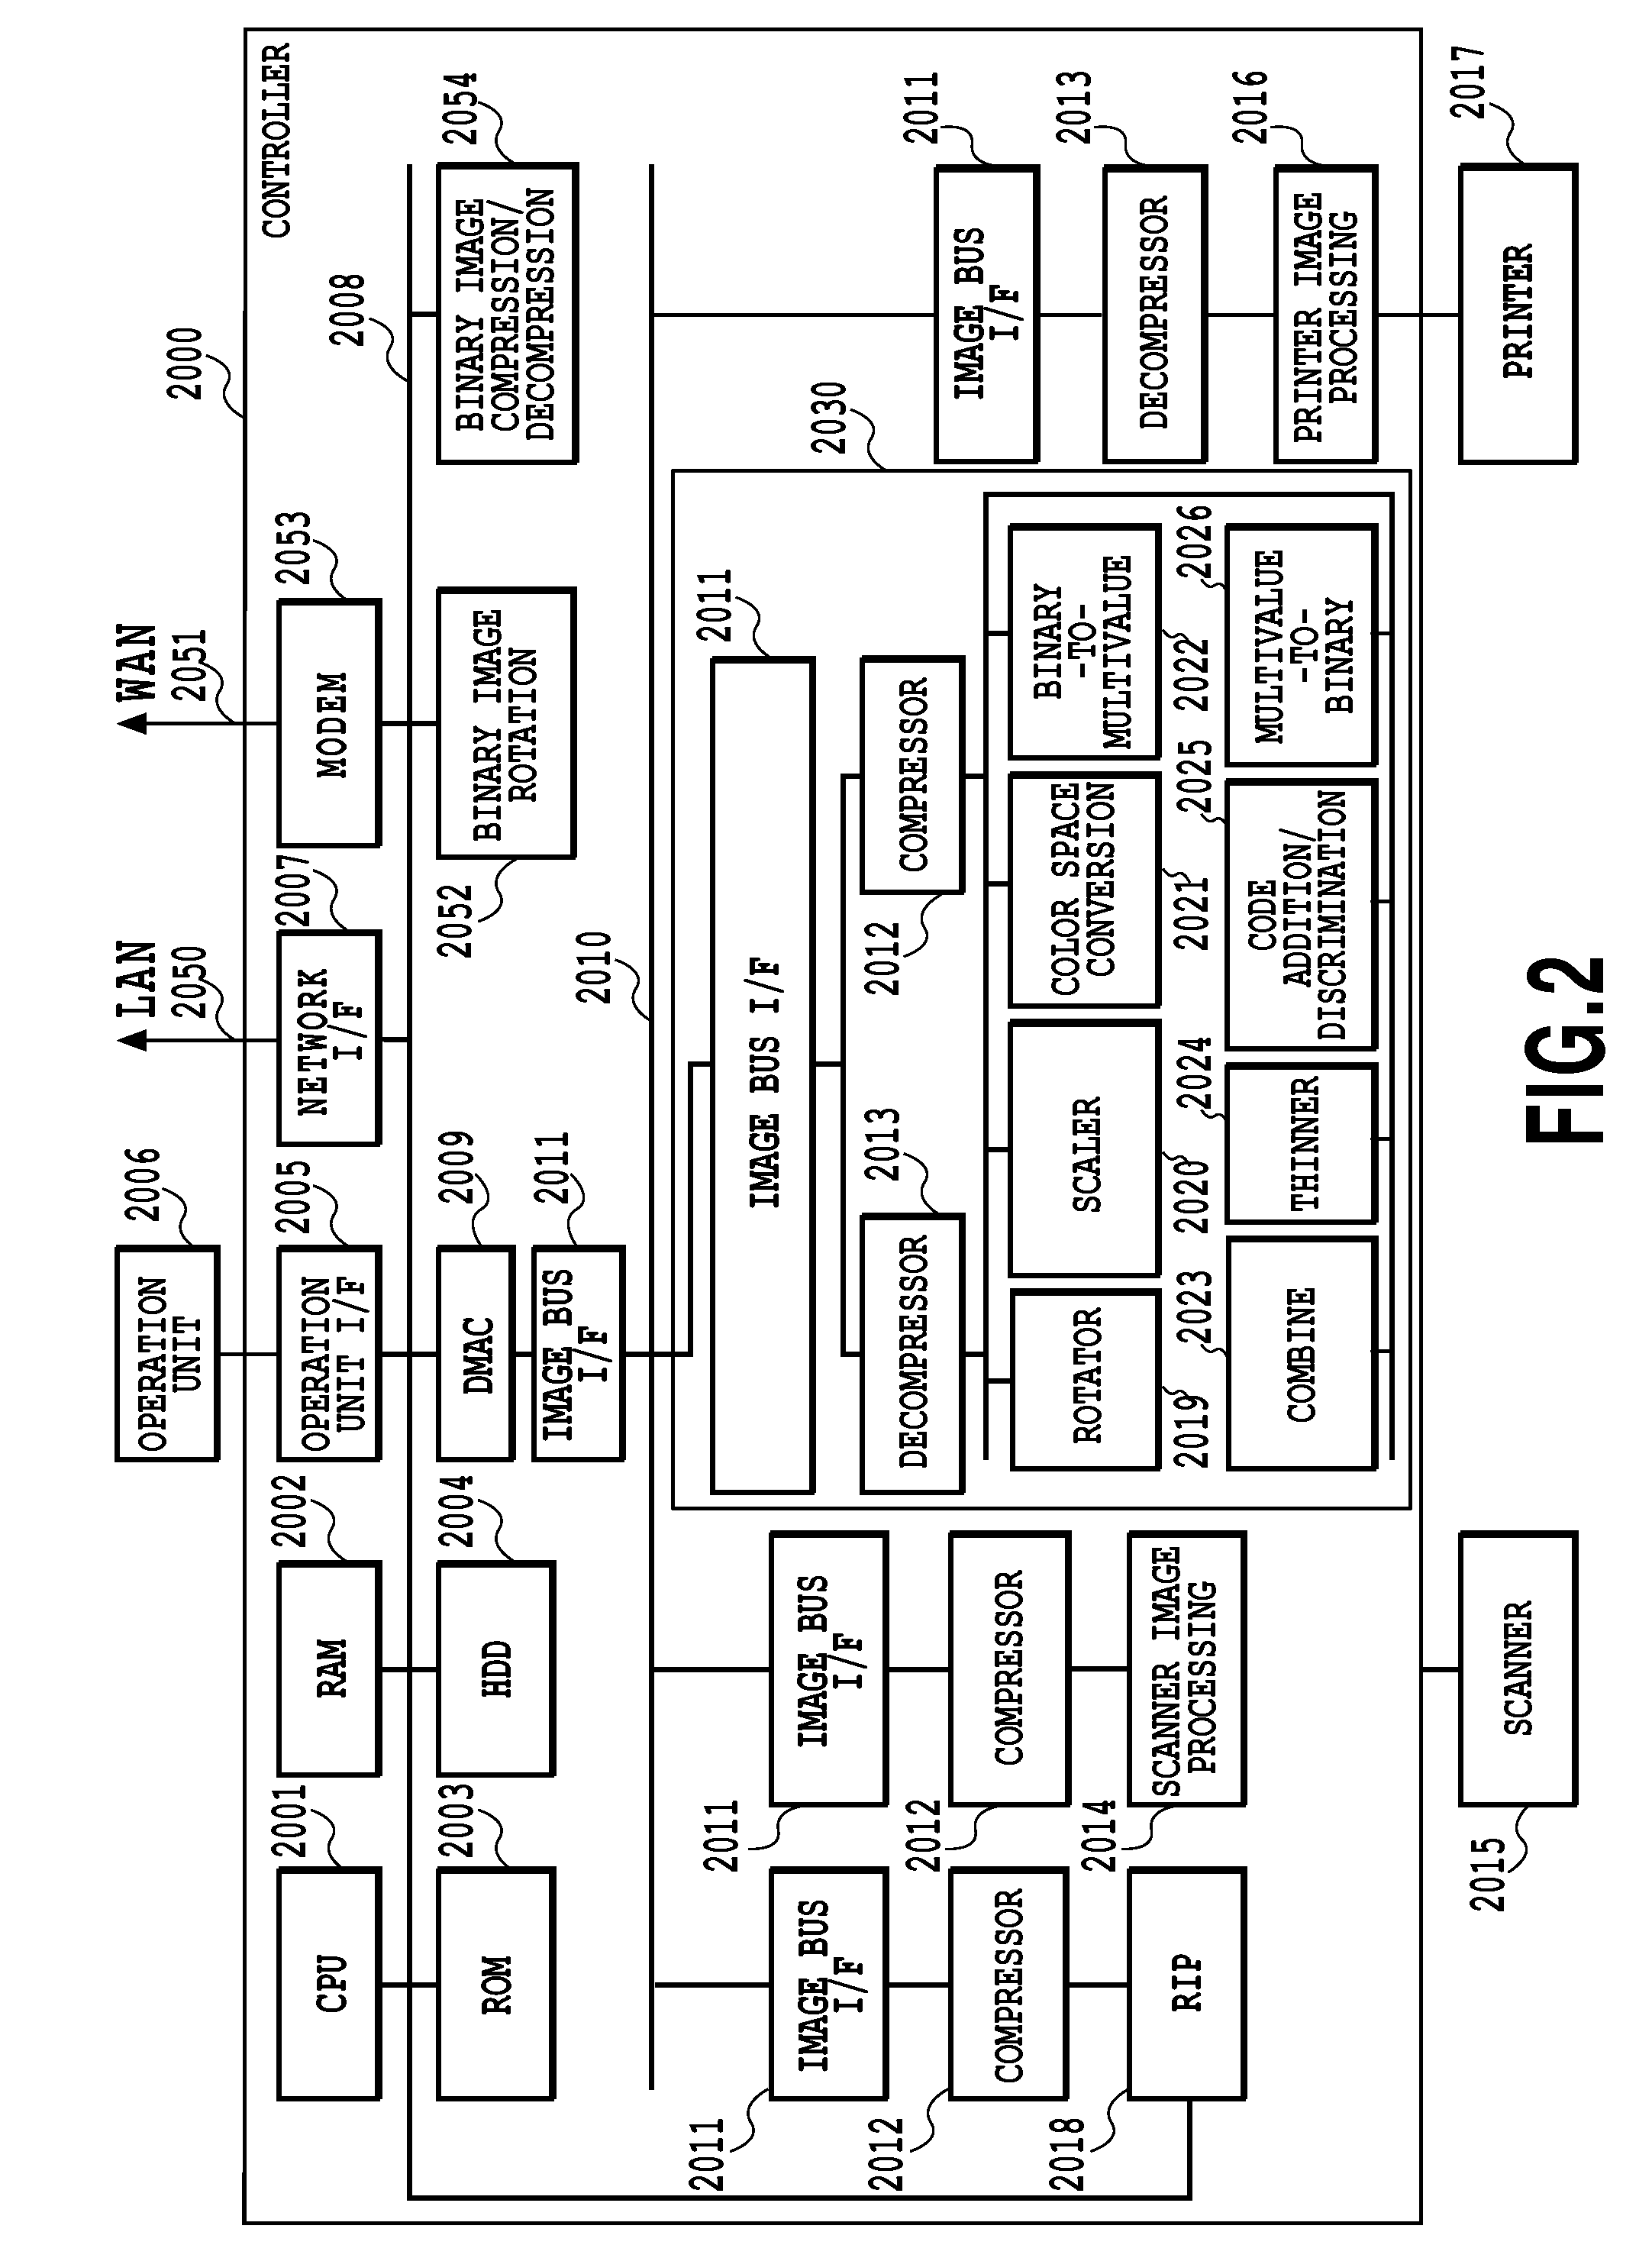 Image processing for reproducing code image from original information